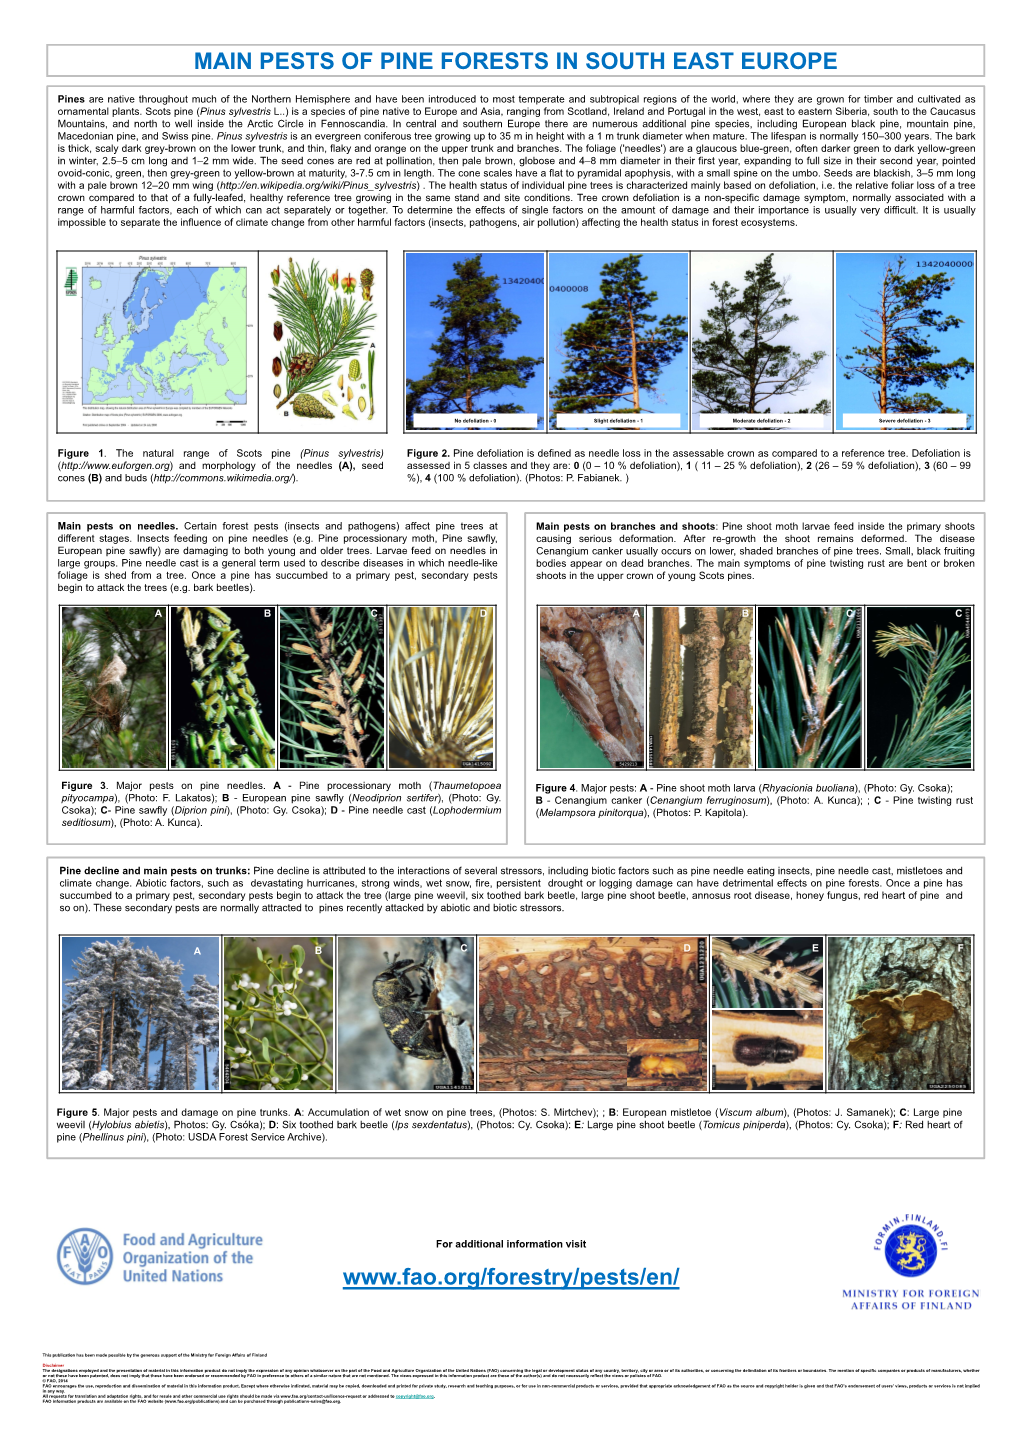 Pests of Pine Forests in South East Europe